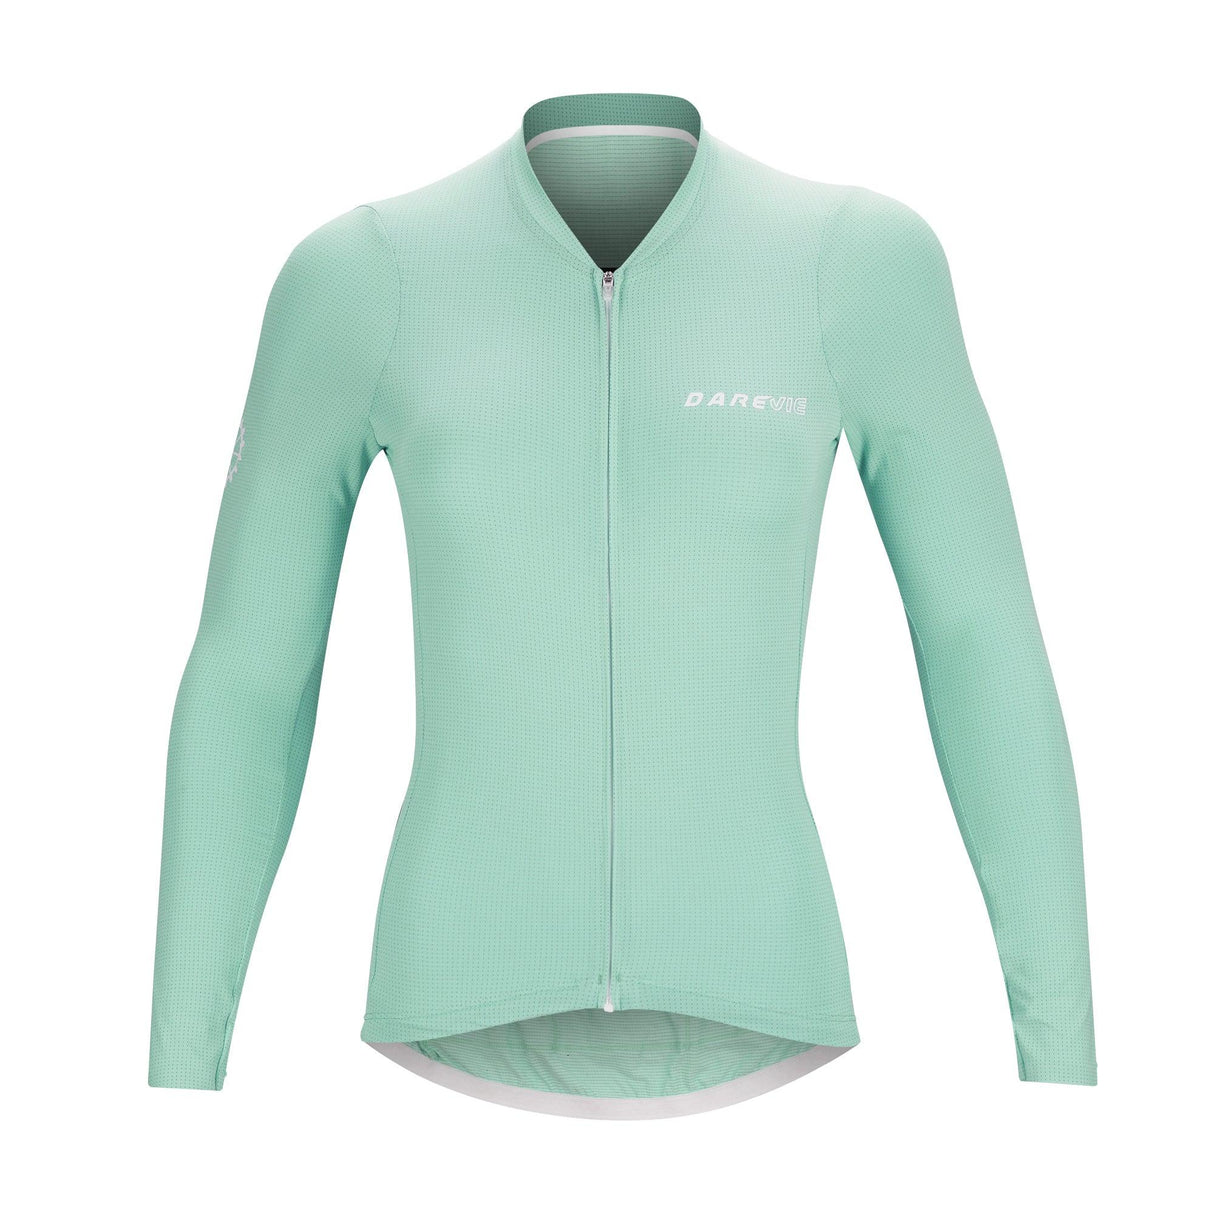 WOMEN'S CARBON LS CYCLING JERSEY -GREEN-FRONT- Darevie Shop